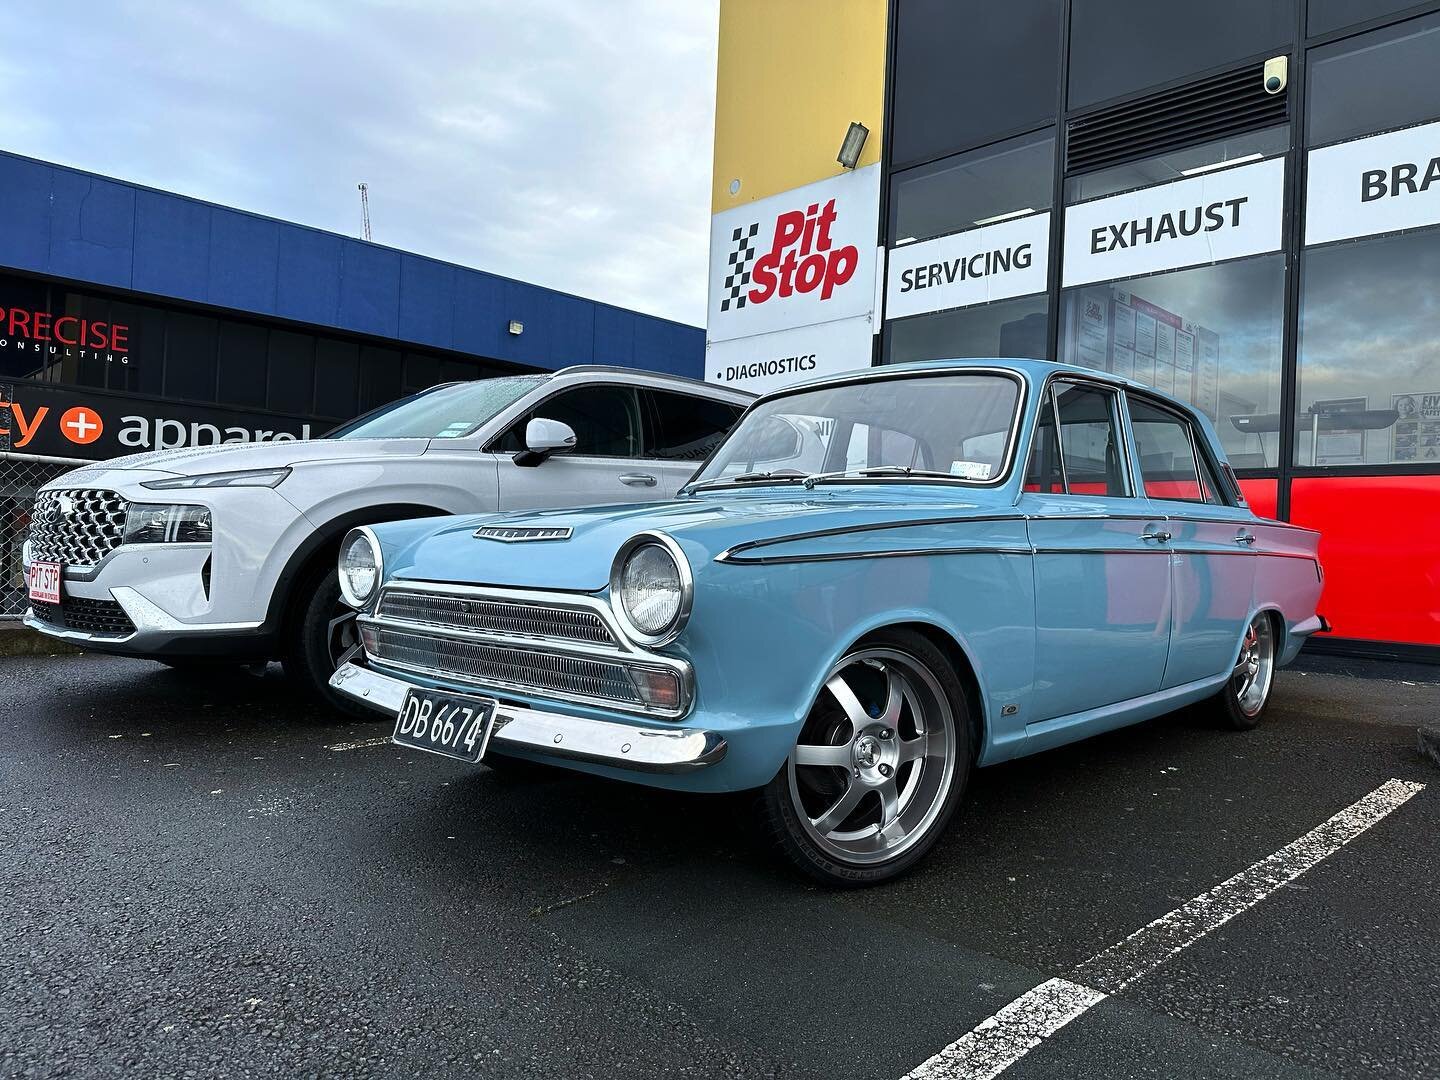 A little piece of history rolled on this week anabsolute stunning 65 Cortina 🥰🤩 #cortinamk1 #backinmyday #cruising